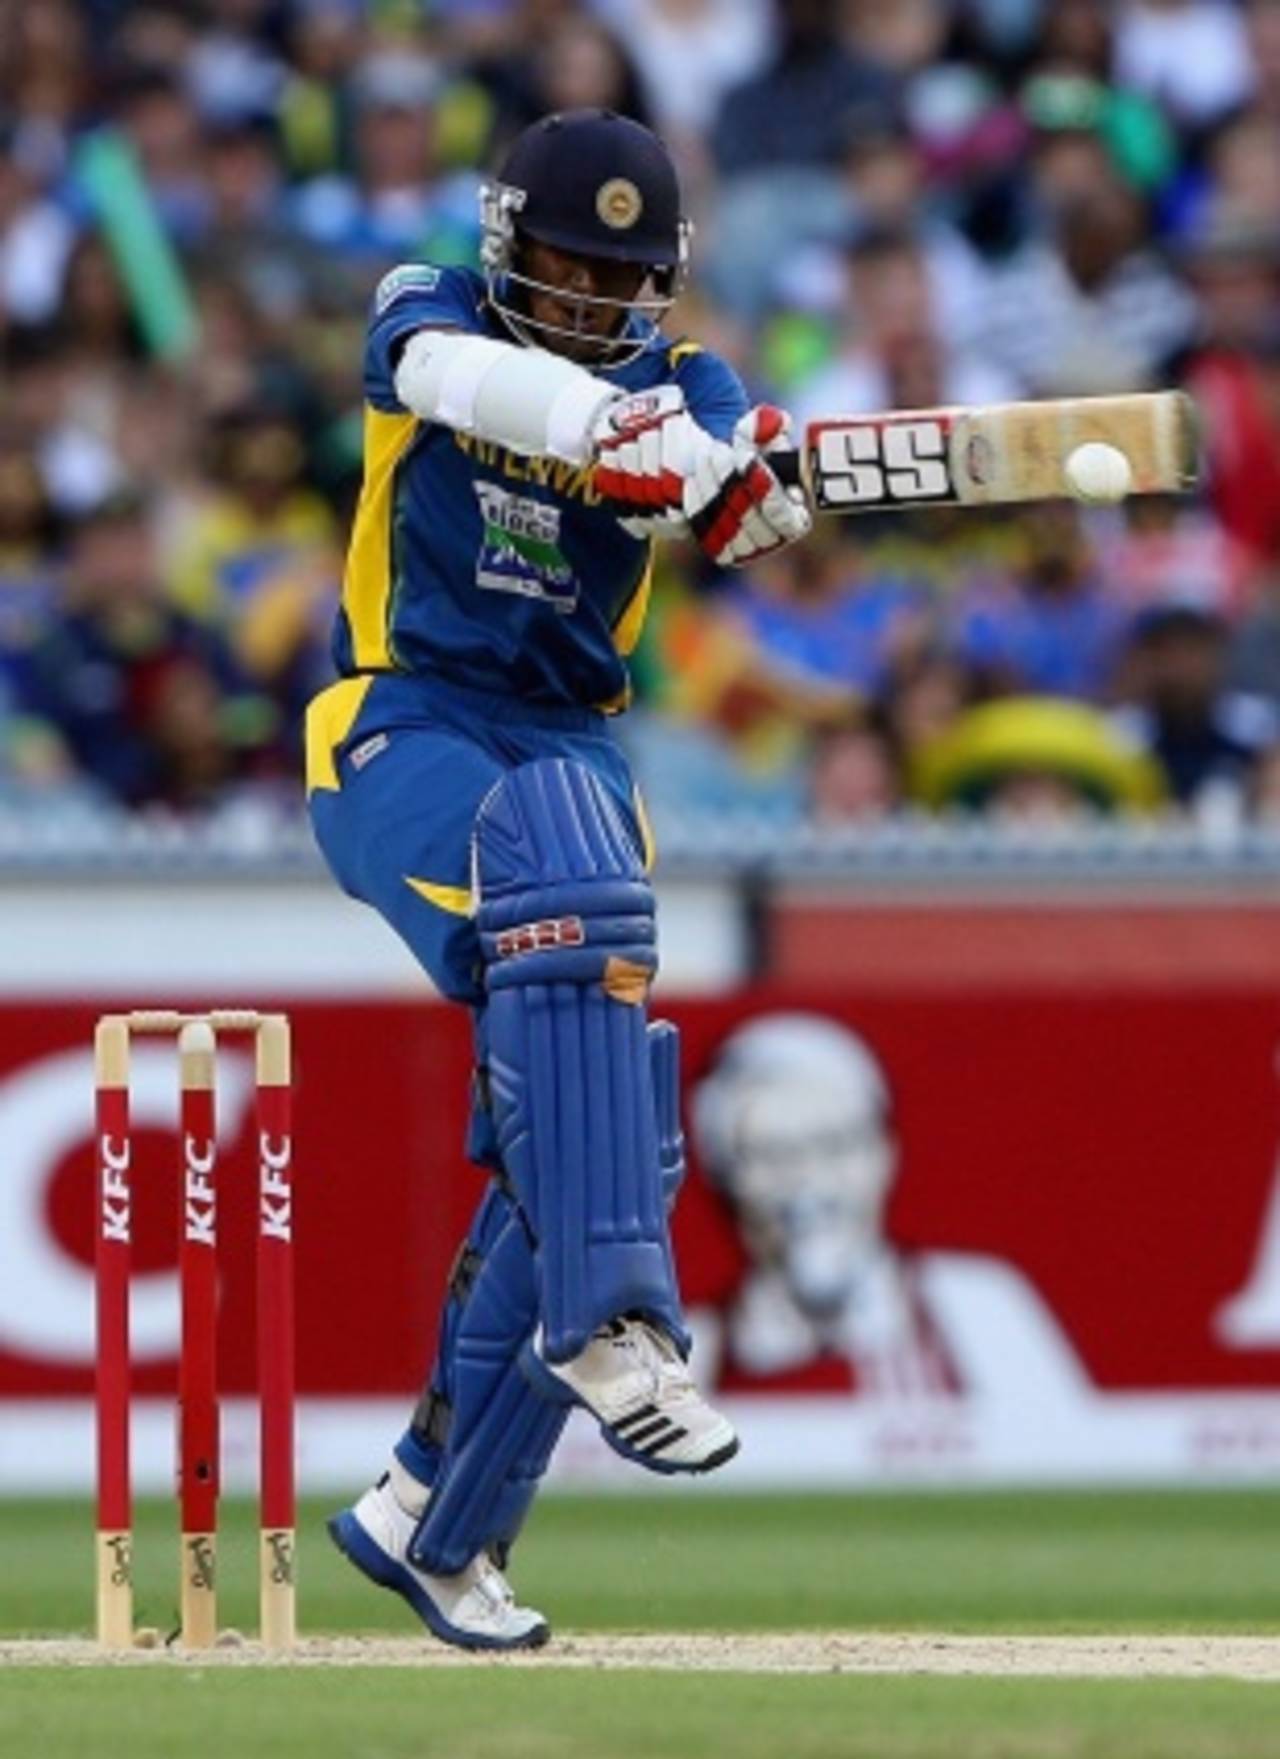 File photo: Kushal Janith Perera's 336 for Colts came off 275 balls and included 43 boundaries&nbsp;&nbsp;&bull;&nbsp;&nbsp;Getty Images